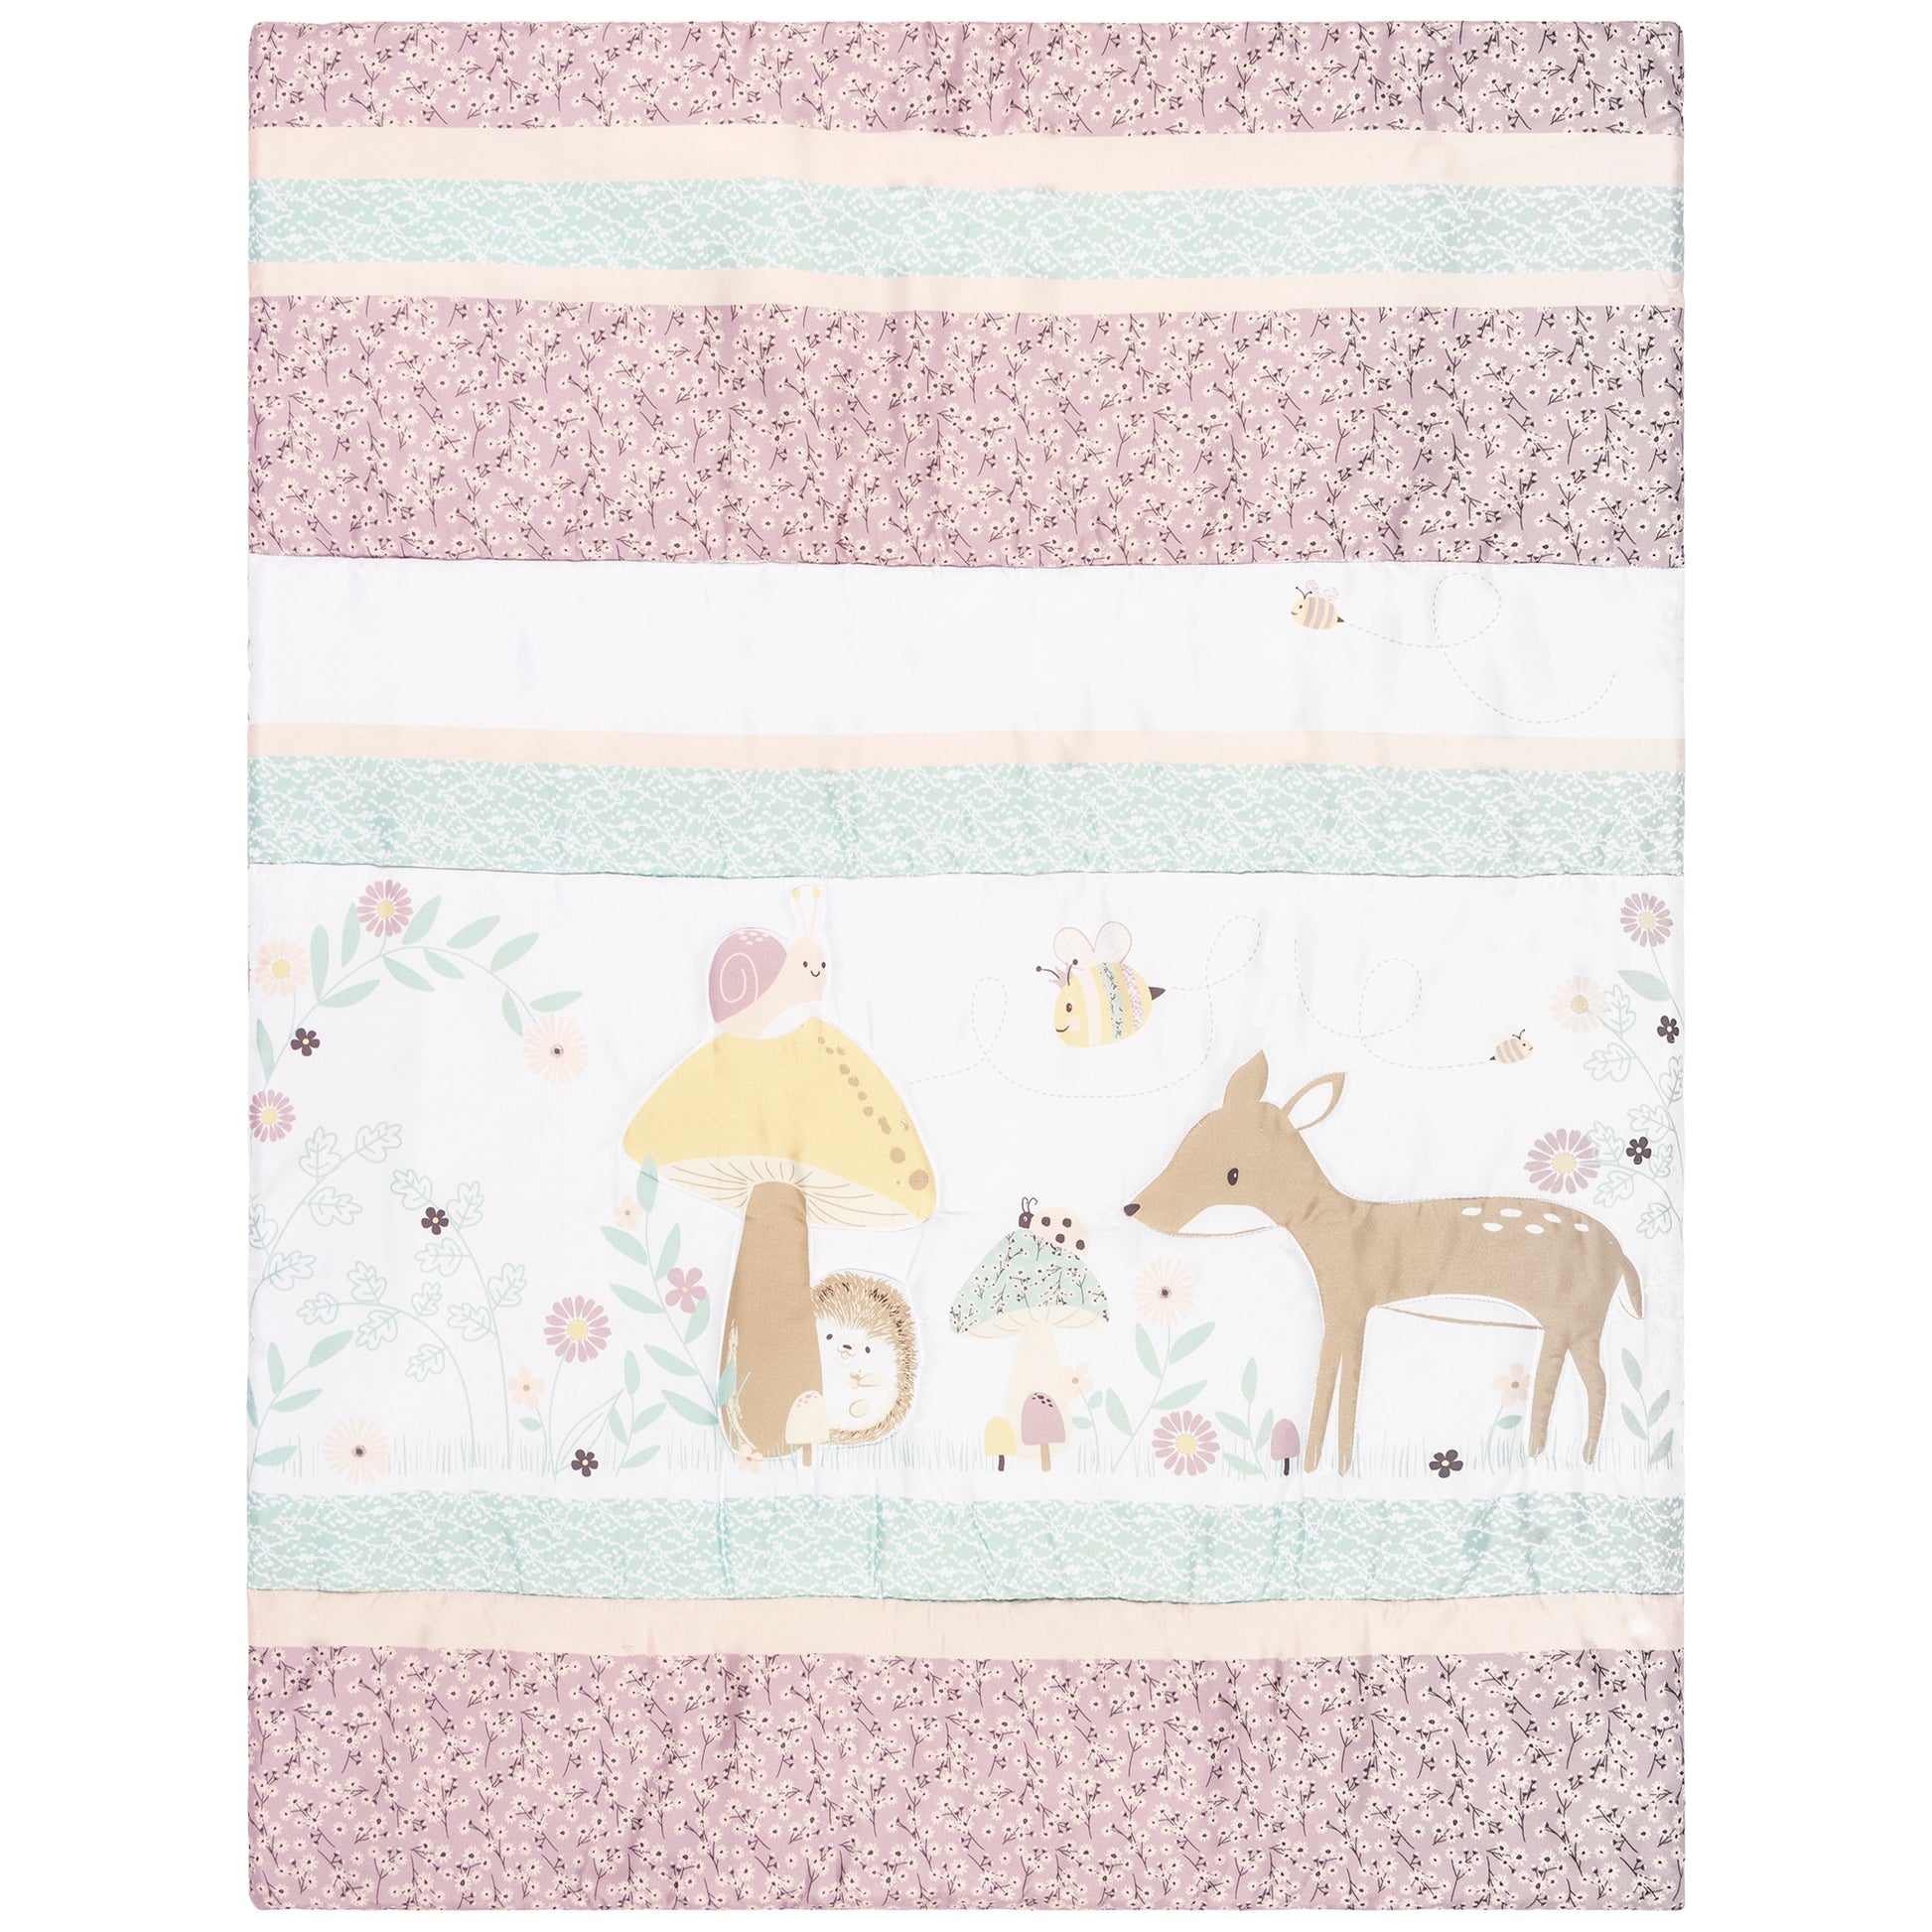  Enchanted Garden 4 Piece Crib Bedding Set by Sammy & Lou® nursery quilt/ playmat features adorable woodland animals and plants on the front with a lilac floral scatter print, blue haze line sketch print and pale peach blush strips. The back features the 